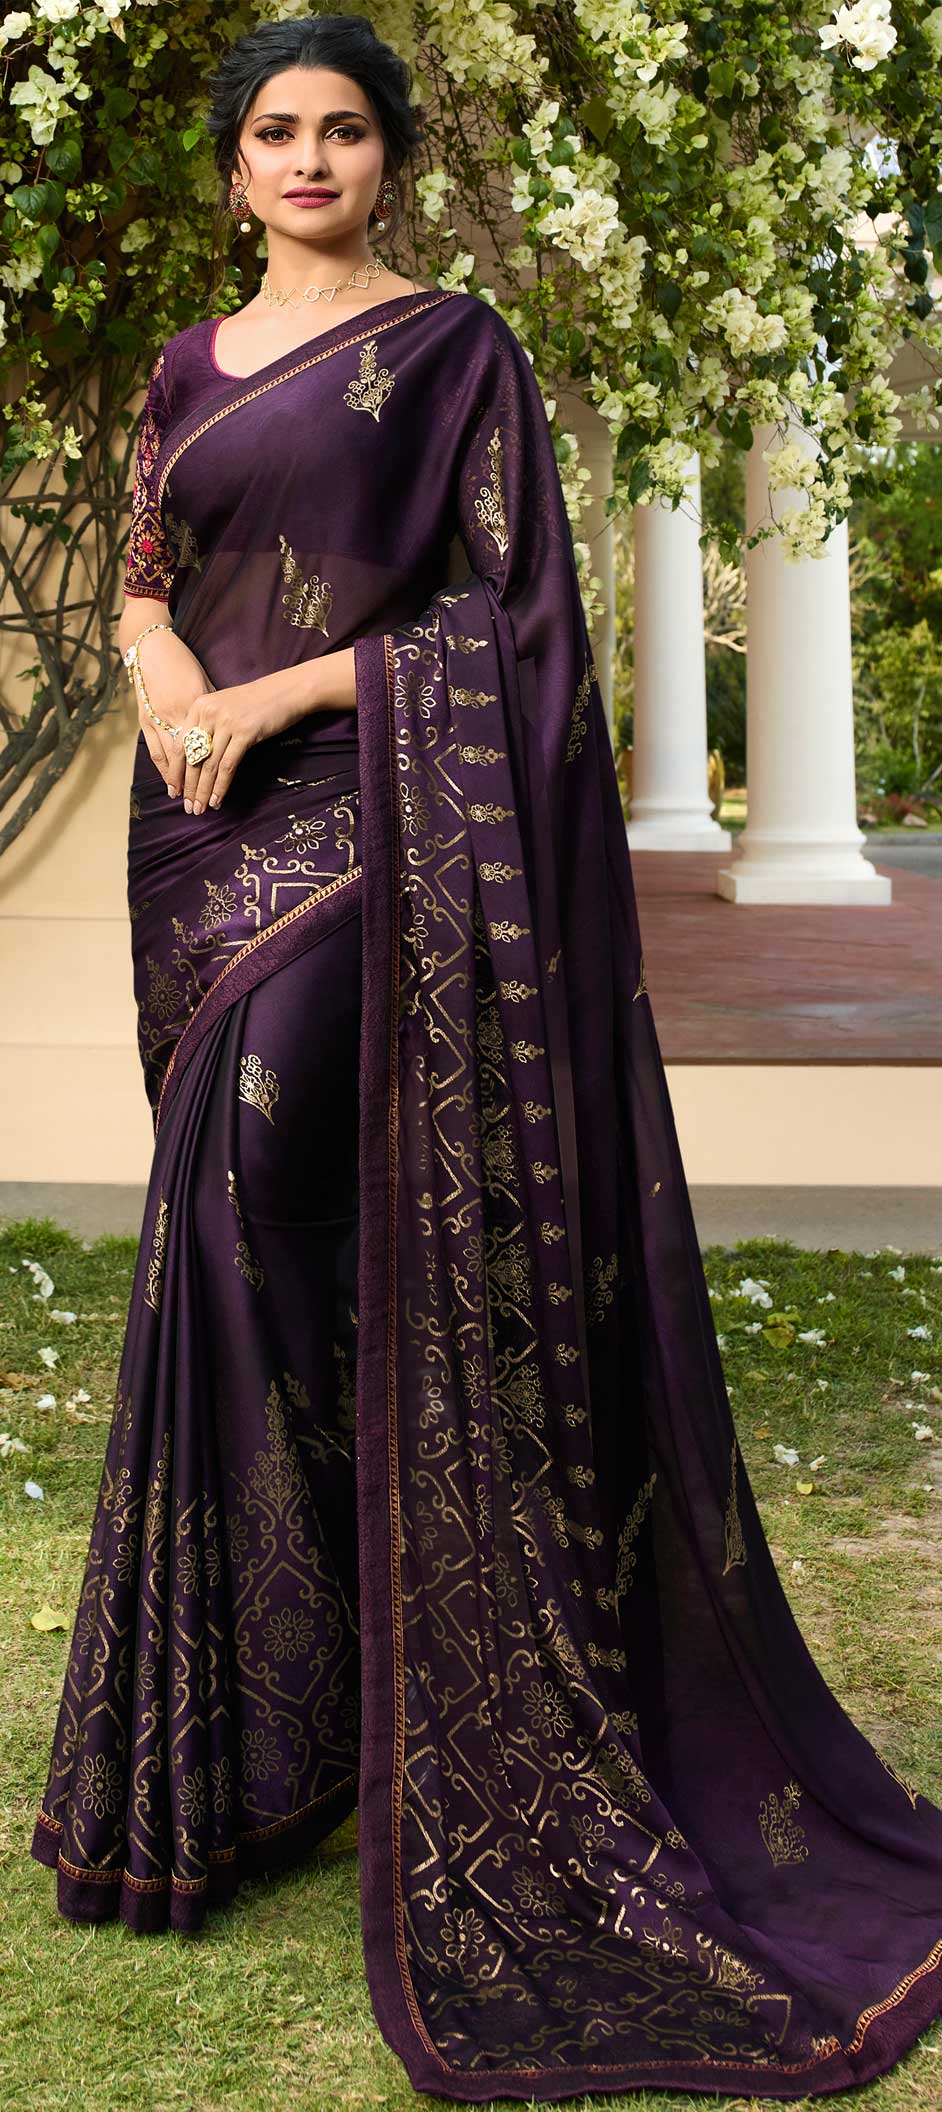 bollywood-purple-and-violet-color-faux-georgette-fabric-saree-1574466